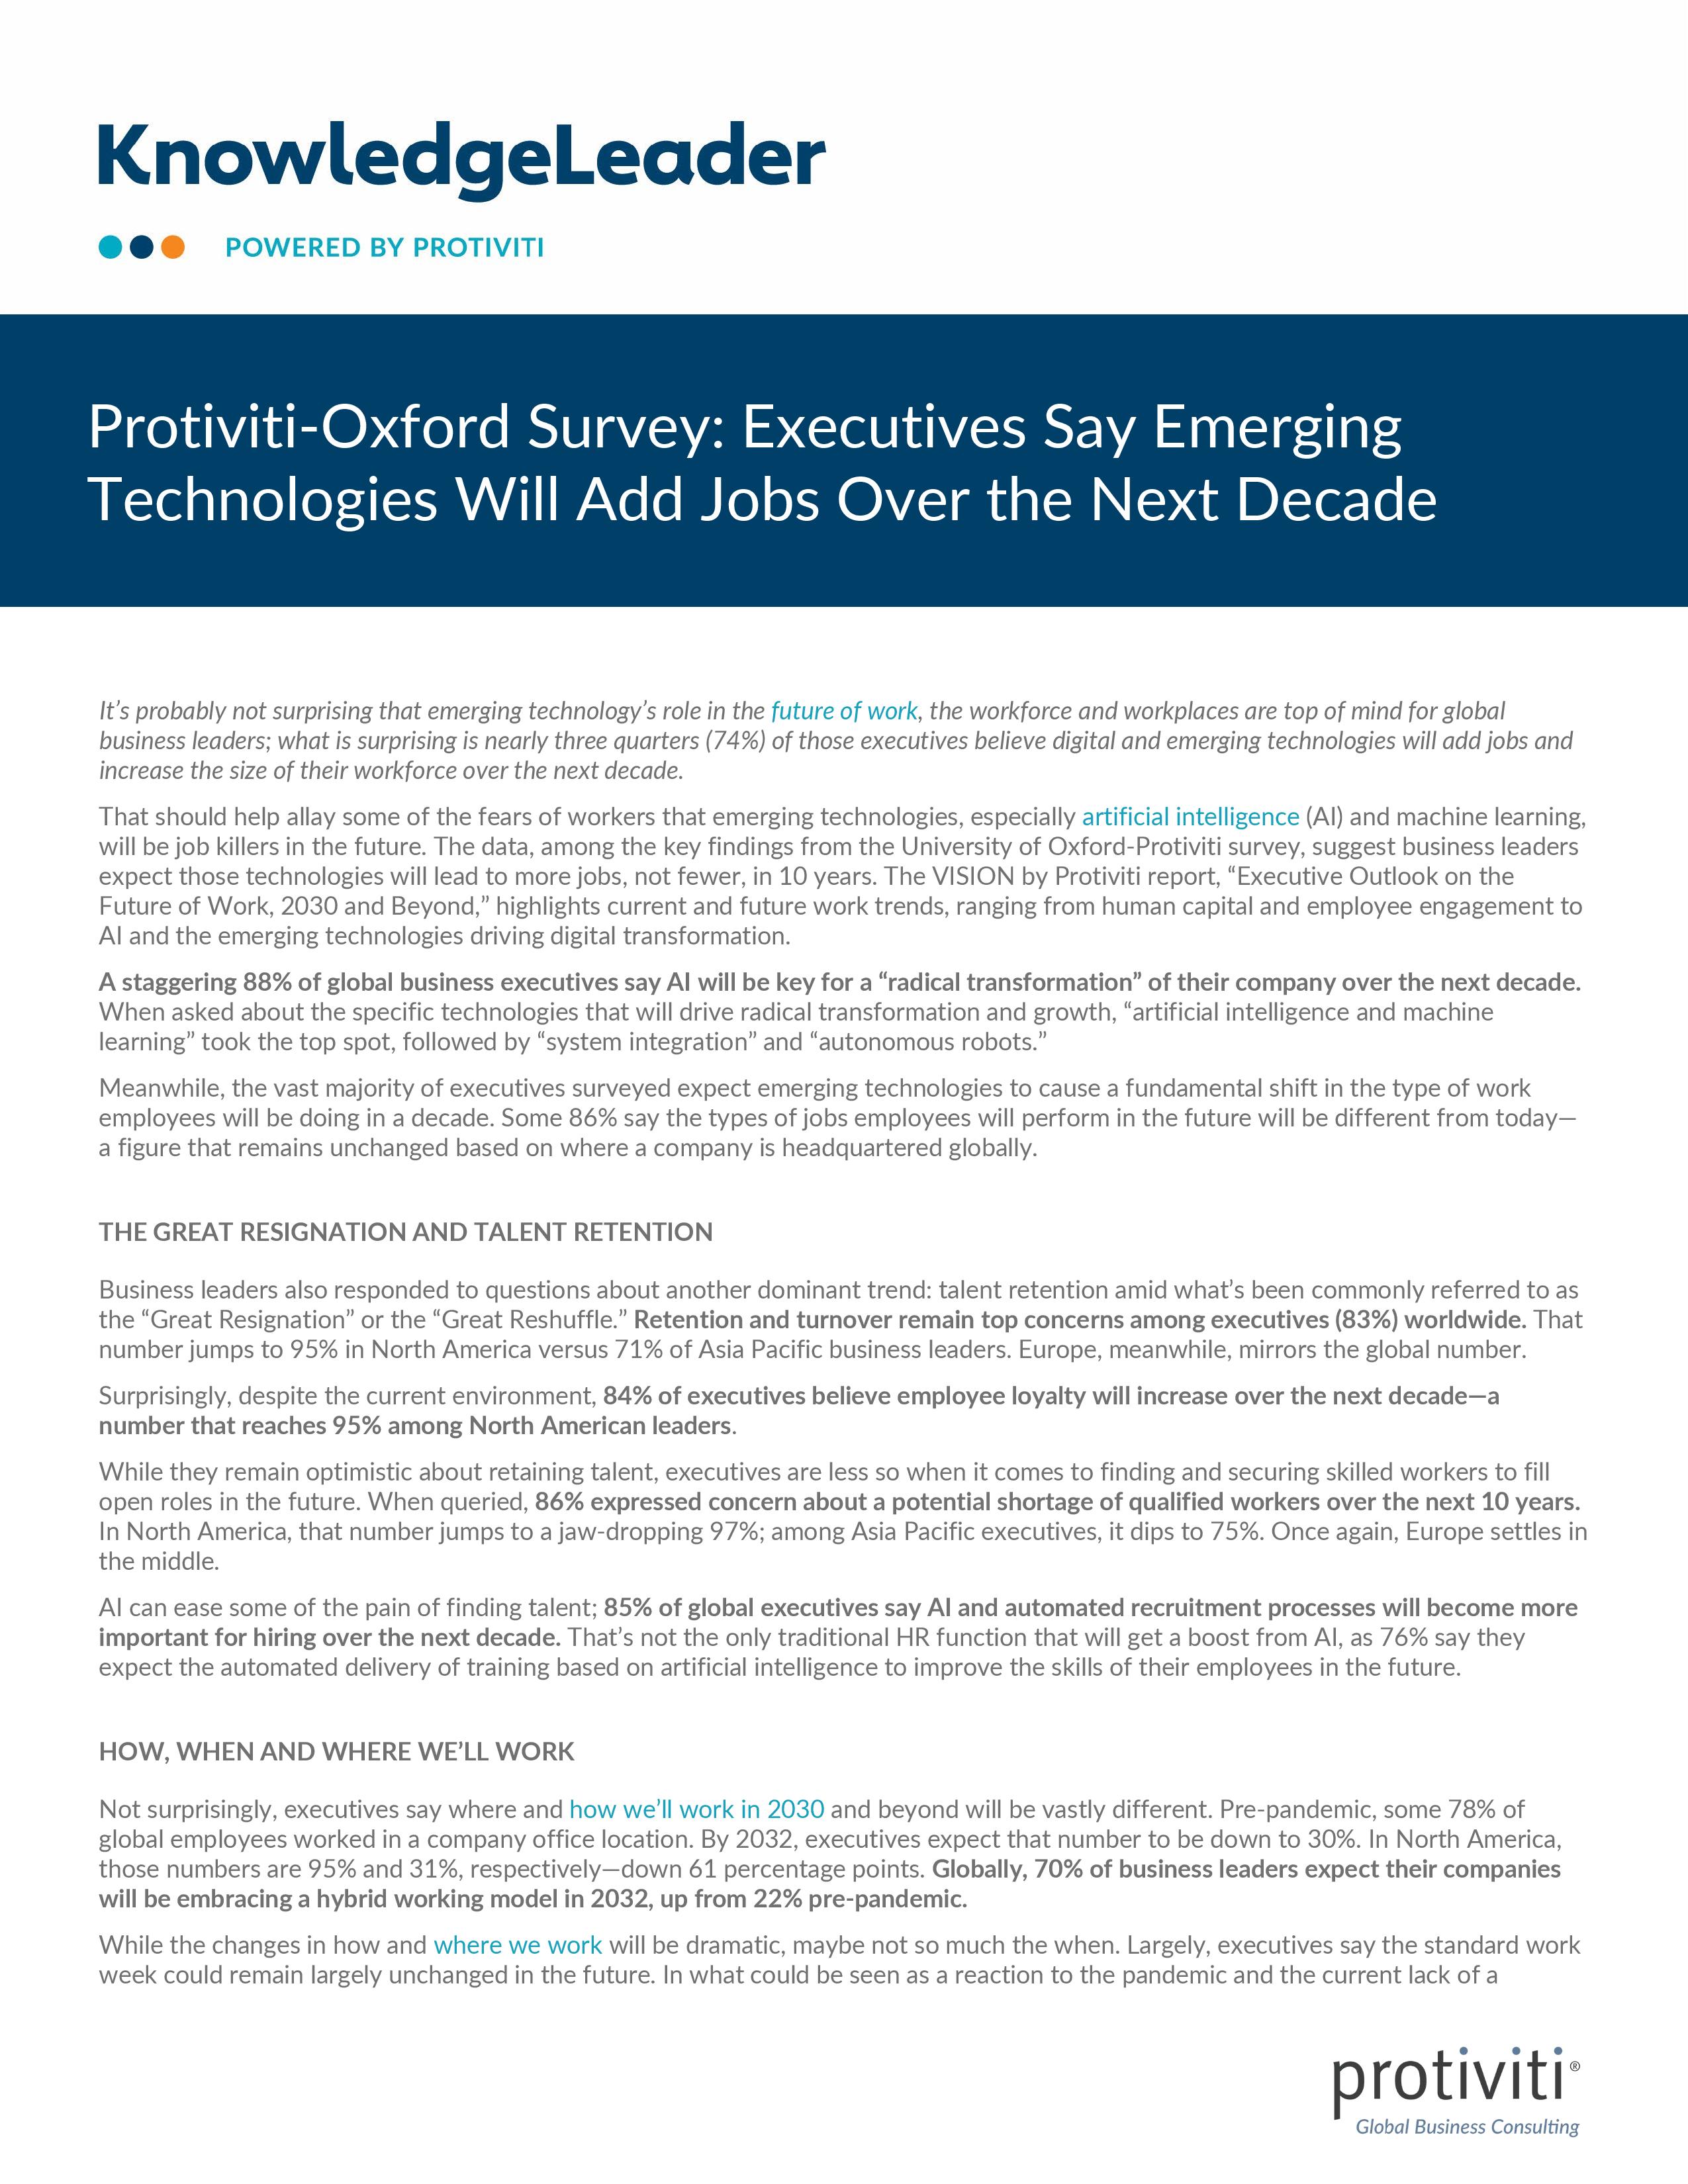 screenshot of the first page of Protiviti-Oxford Survey Executives Say Emerging Technologies Will Add Jobs Over the Next Decade